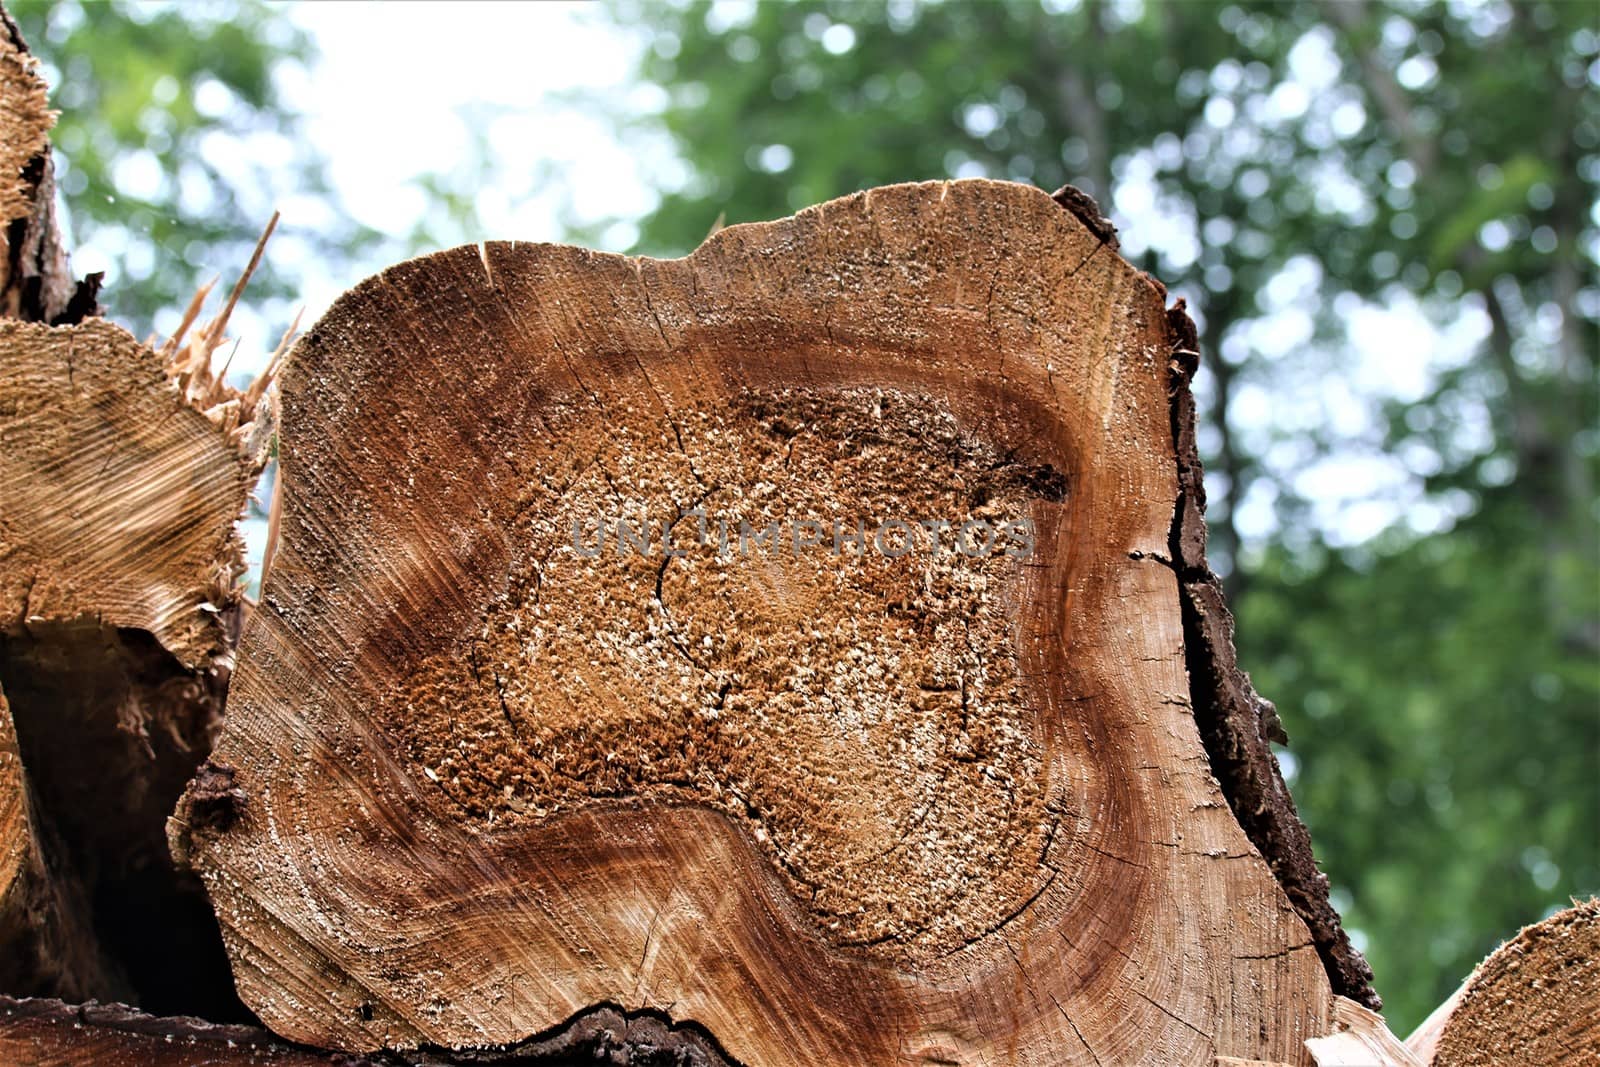 Cut surface of a felled tree trunk by Luise123